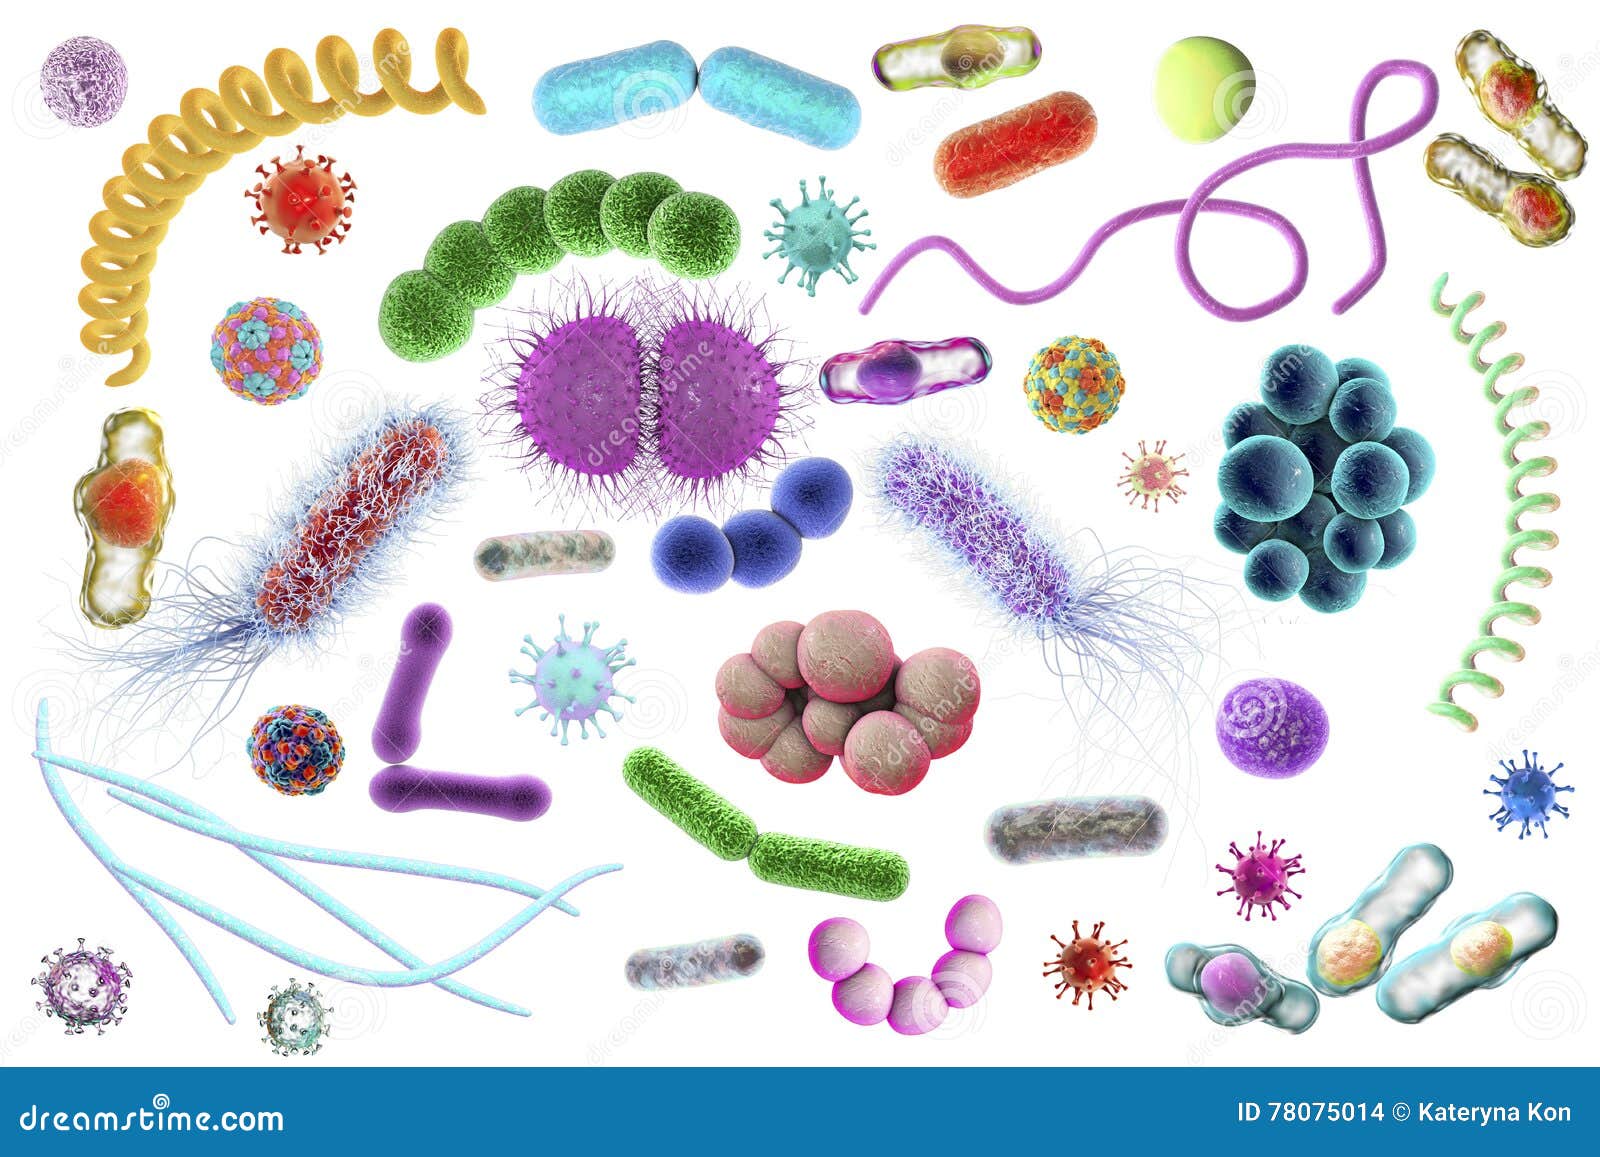 microbes of different s